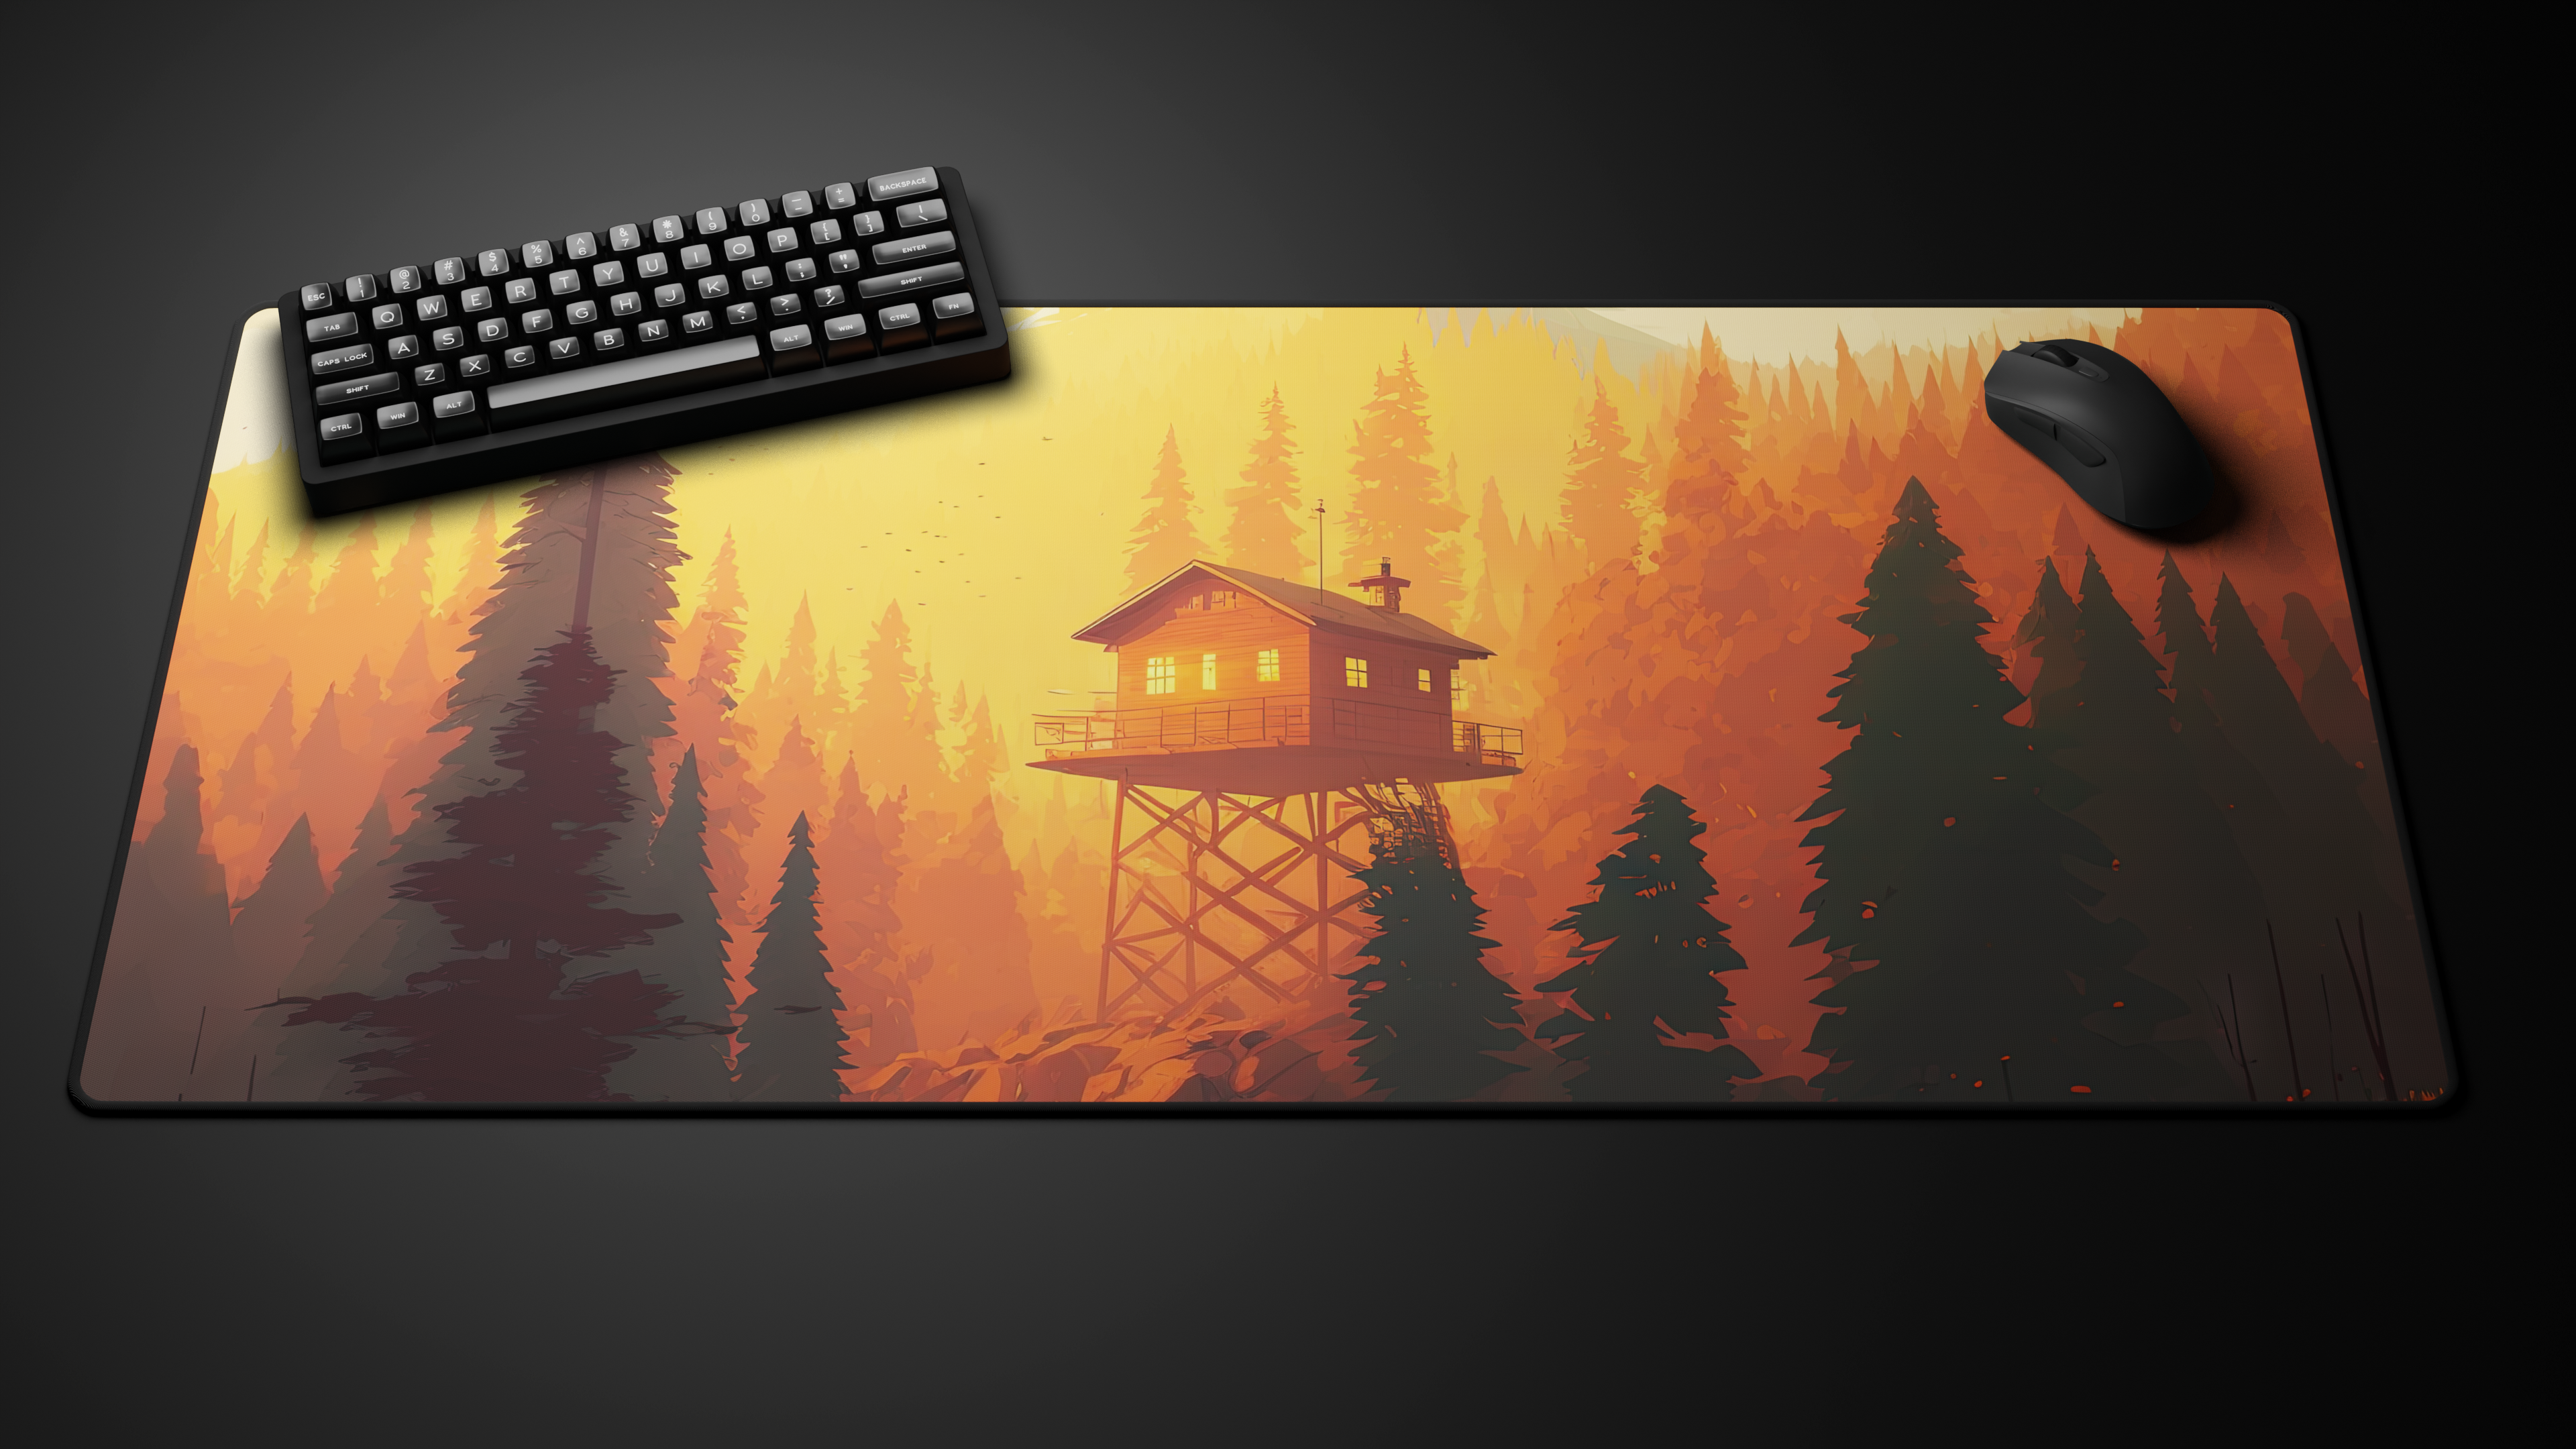 Deskmat 'Winter Collection - Looks like someone's firewatchin' by glutch